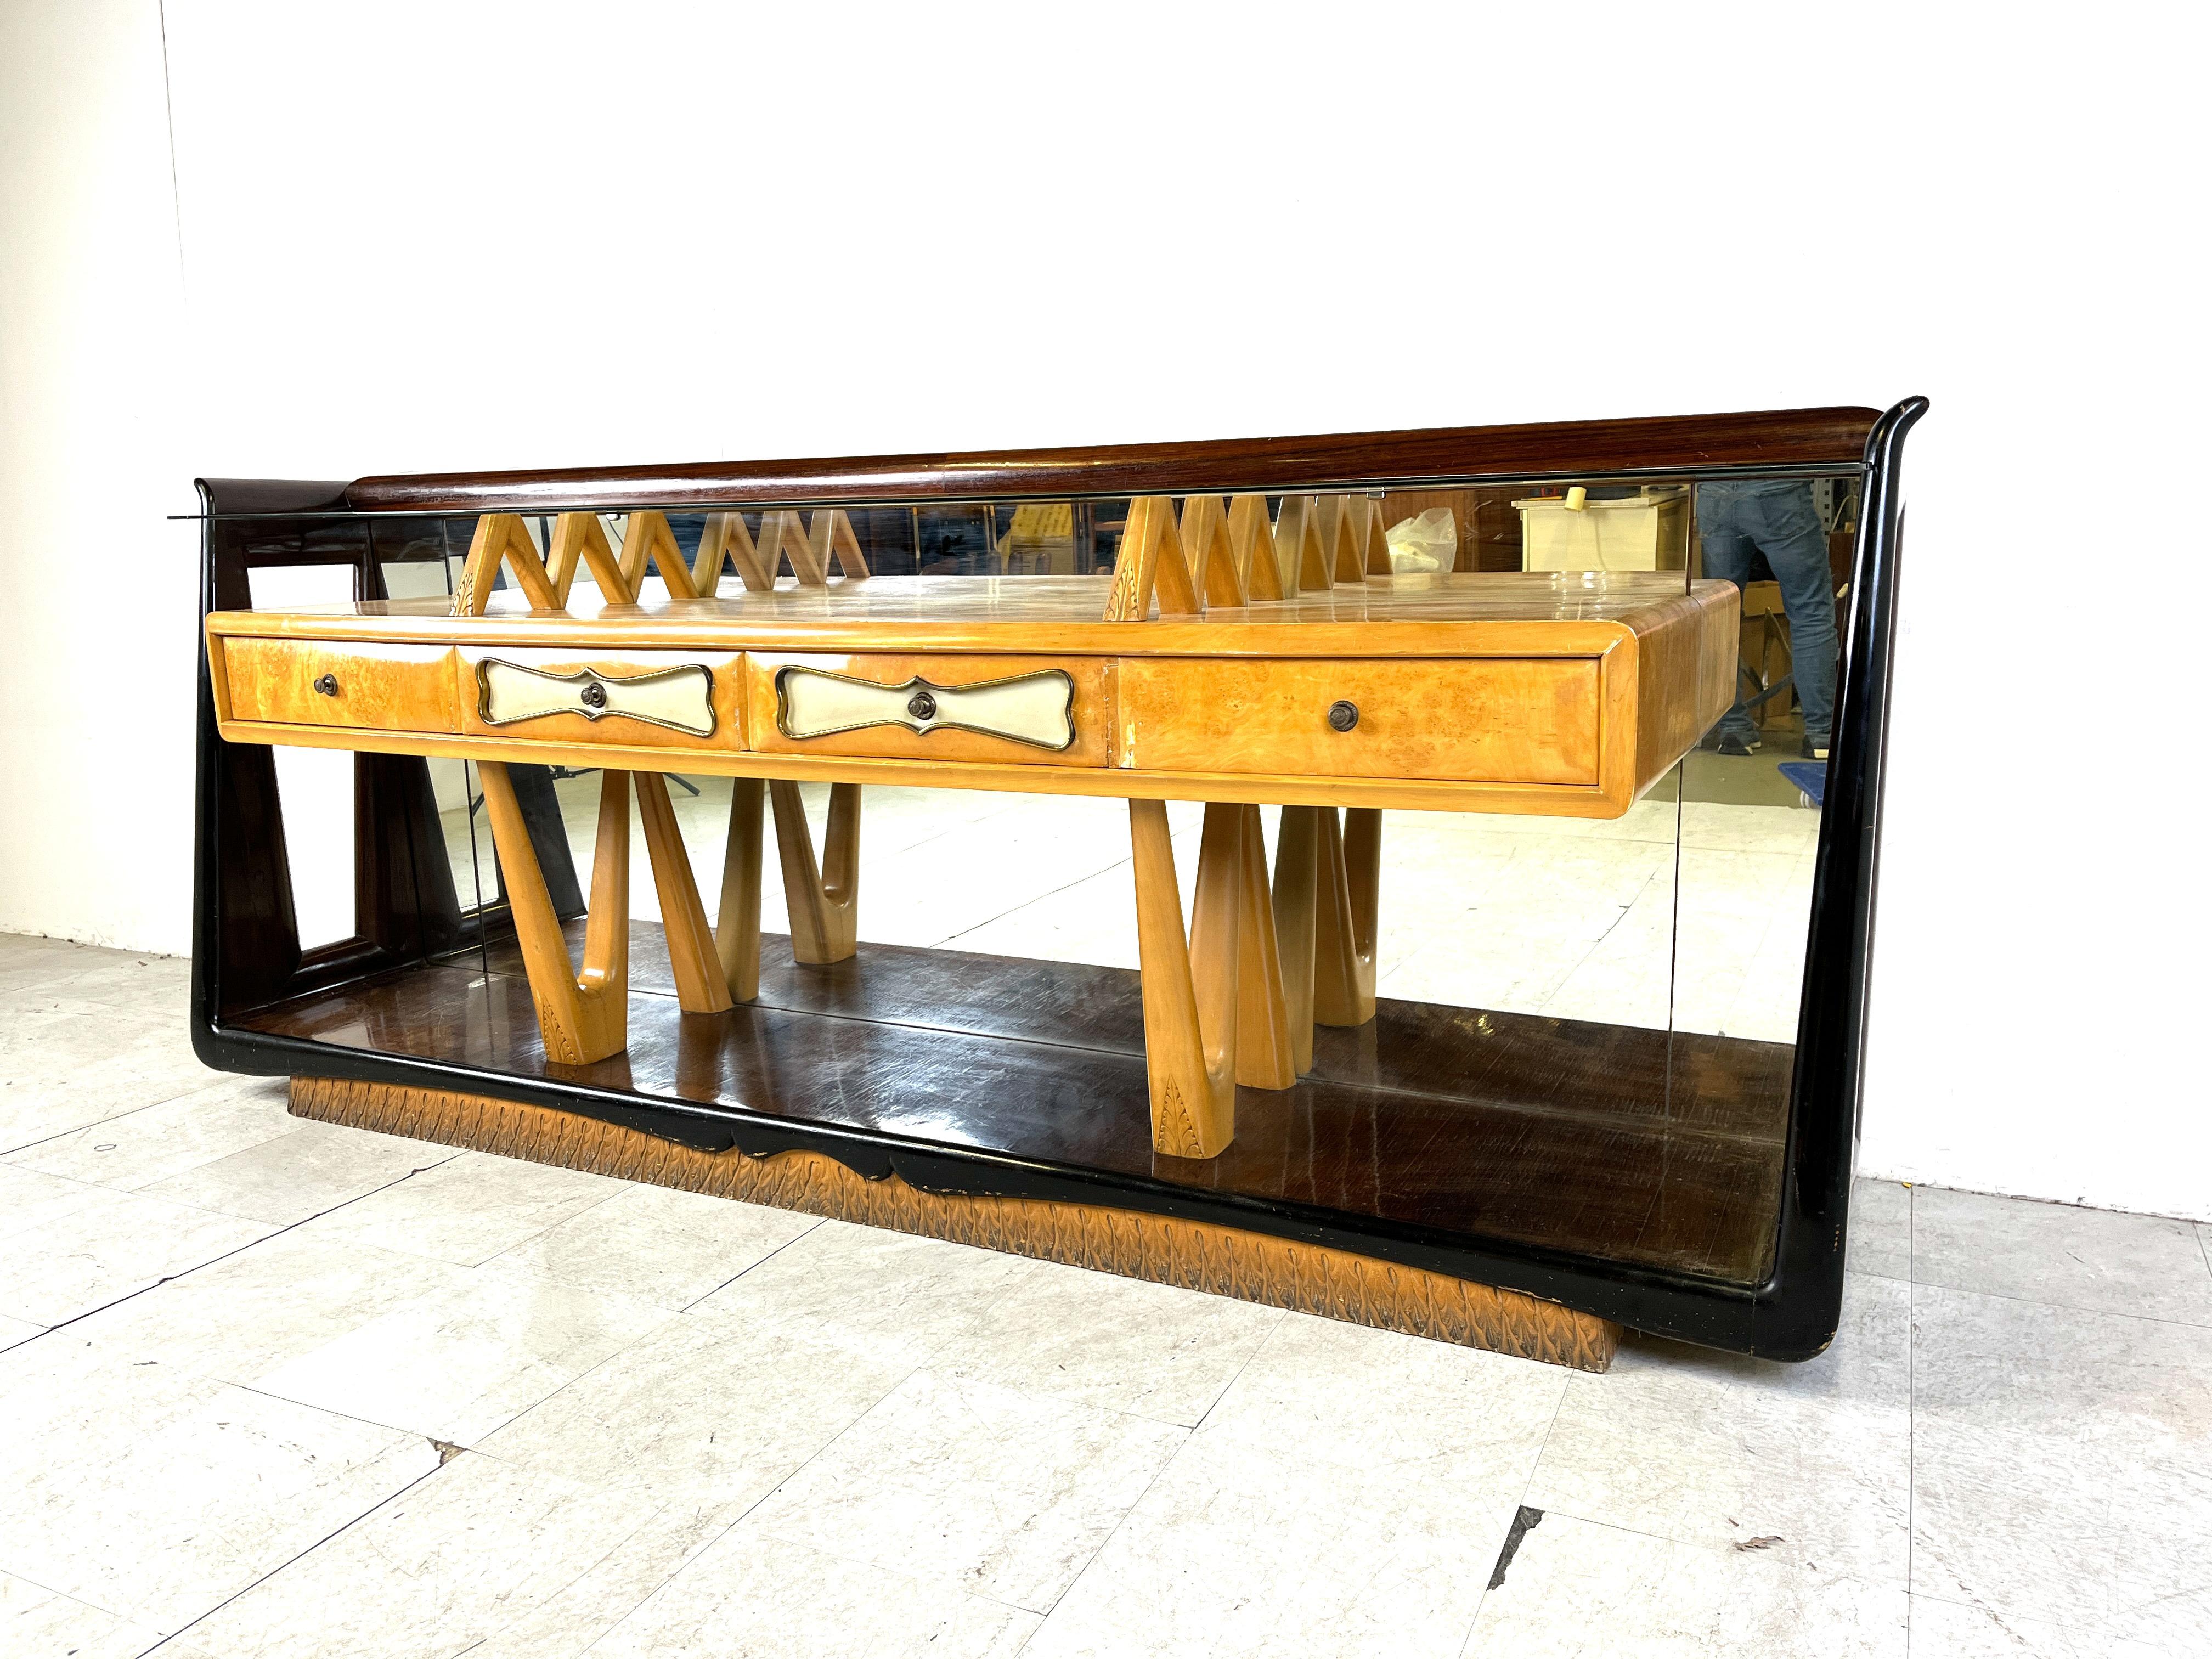 Mid century modern italian sideboard by Osvaldo Borsani featuring made from rosewood, maple wood and mirror.

The maple wooden case features 4 drawes with brass details and handles.

The case is supported by finely crafted legs which also come back